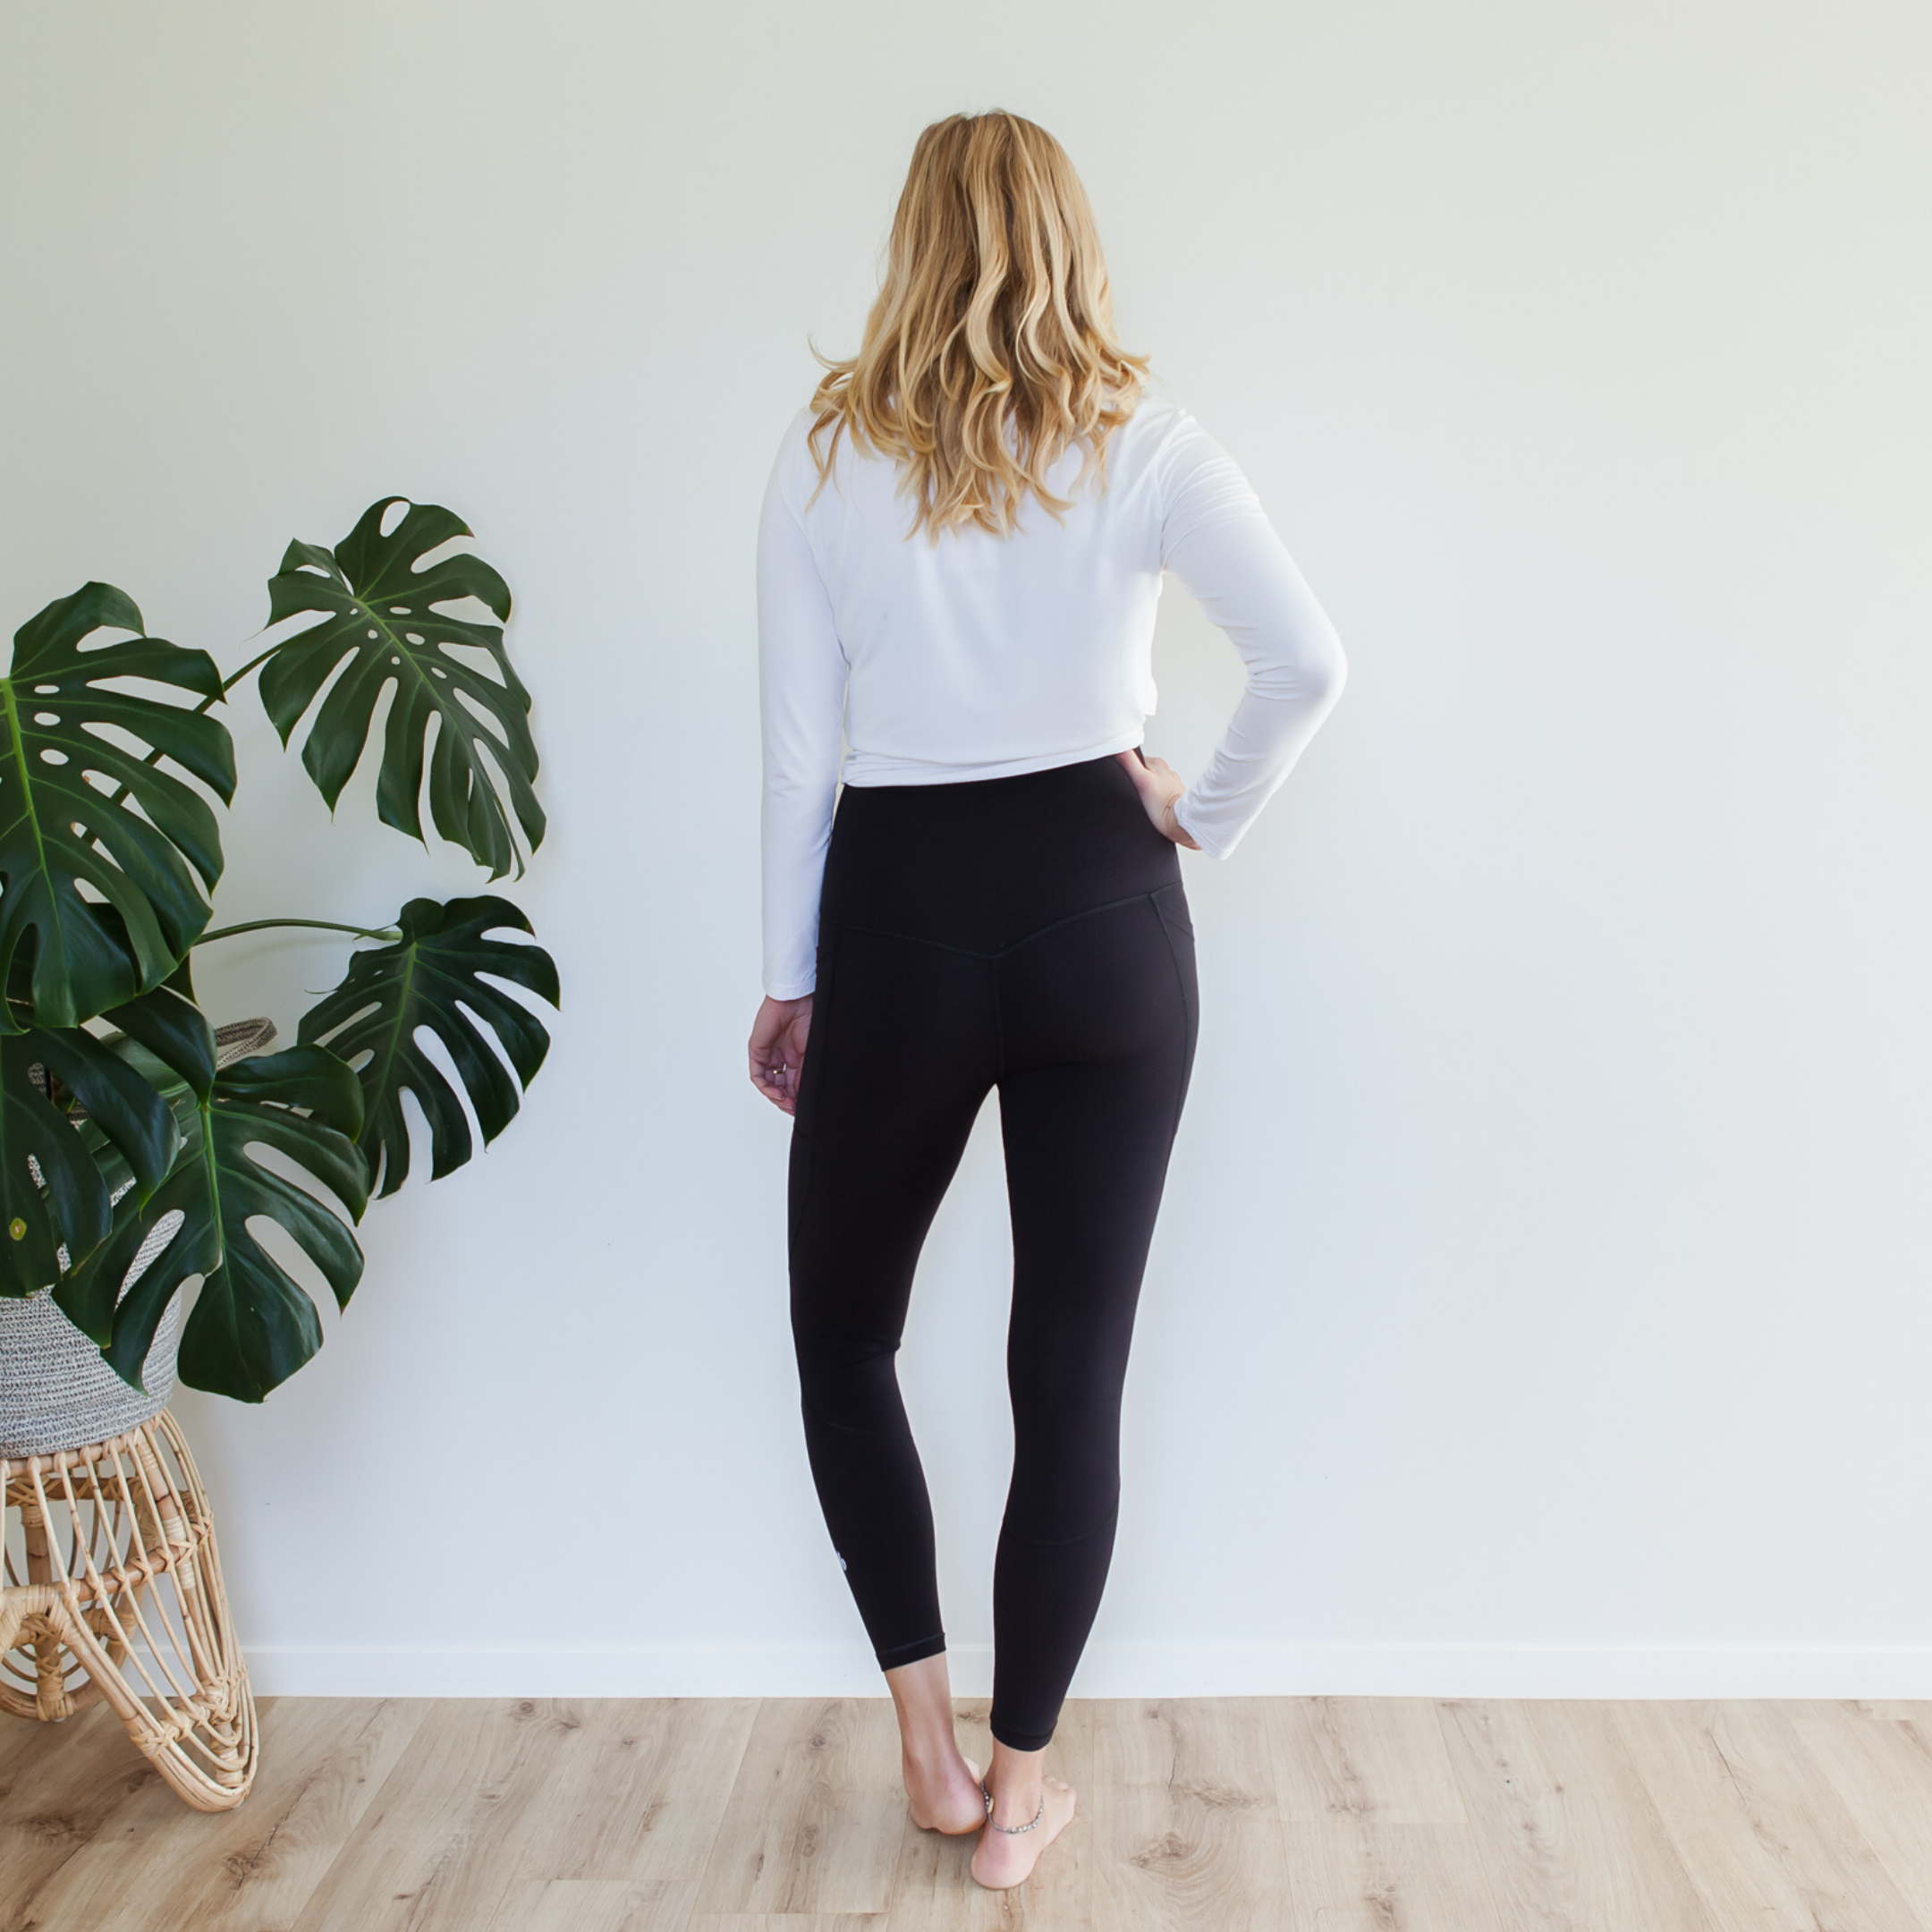 How to wear leggings for 2023's new fitness trends | Liberty